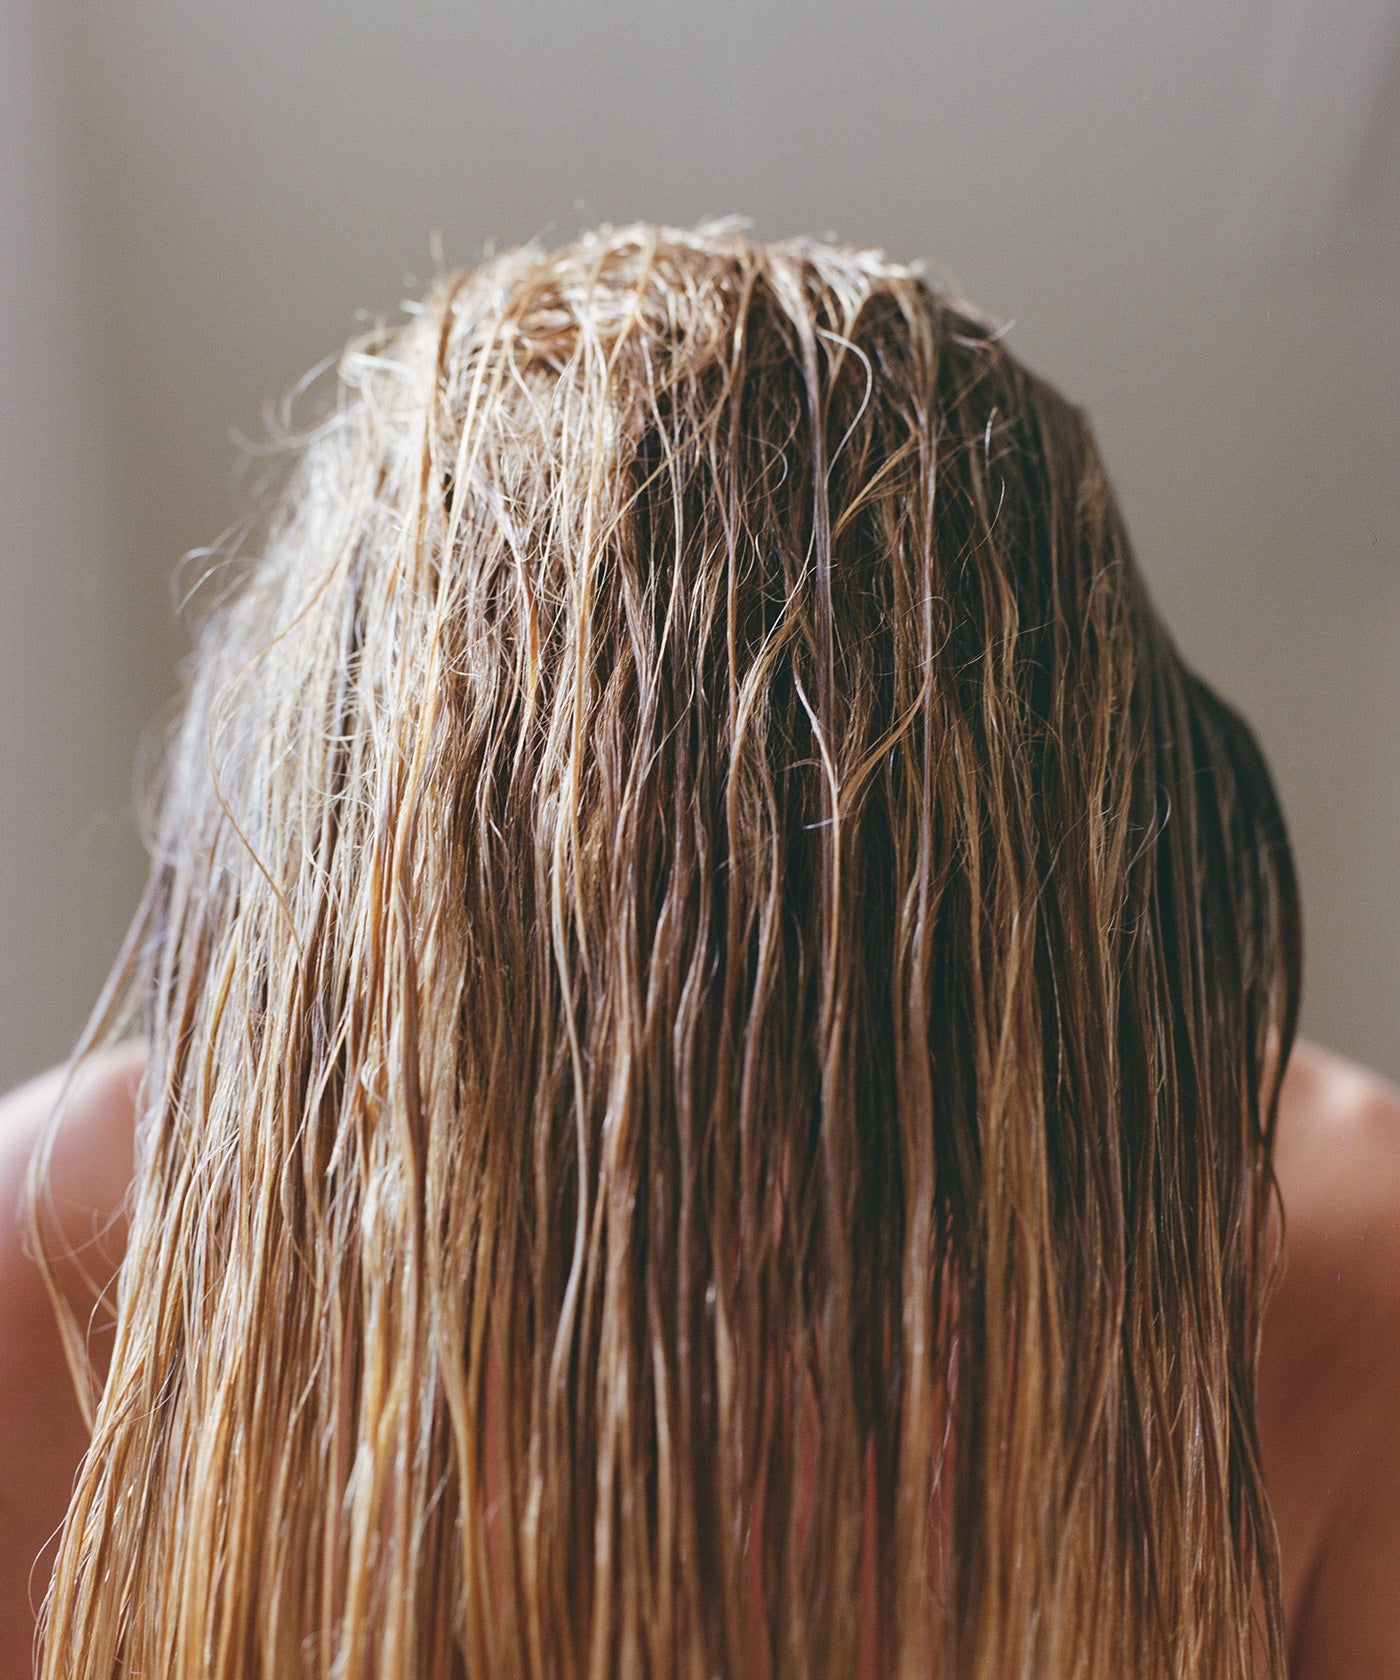 How to Remove Black Hair Dye You Regret Getting